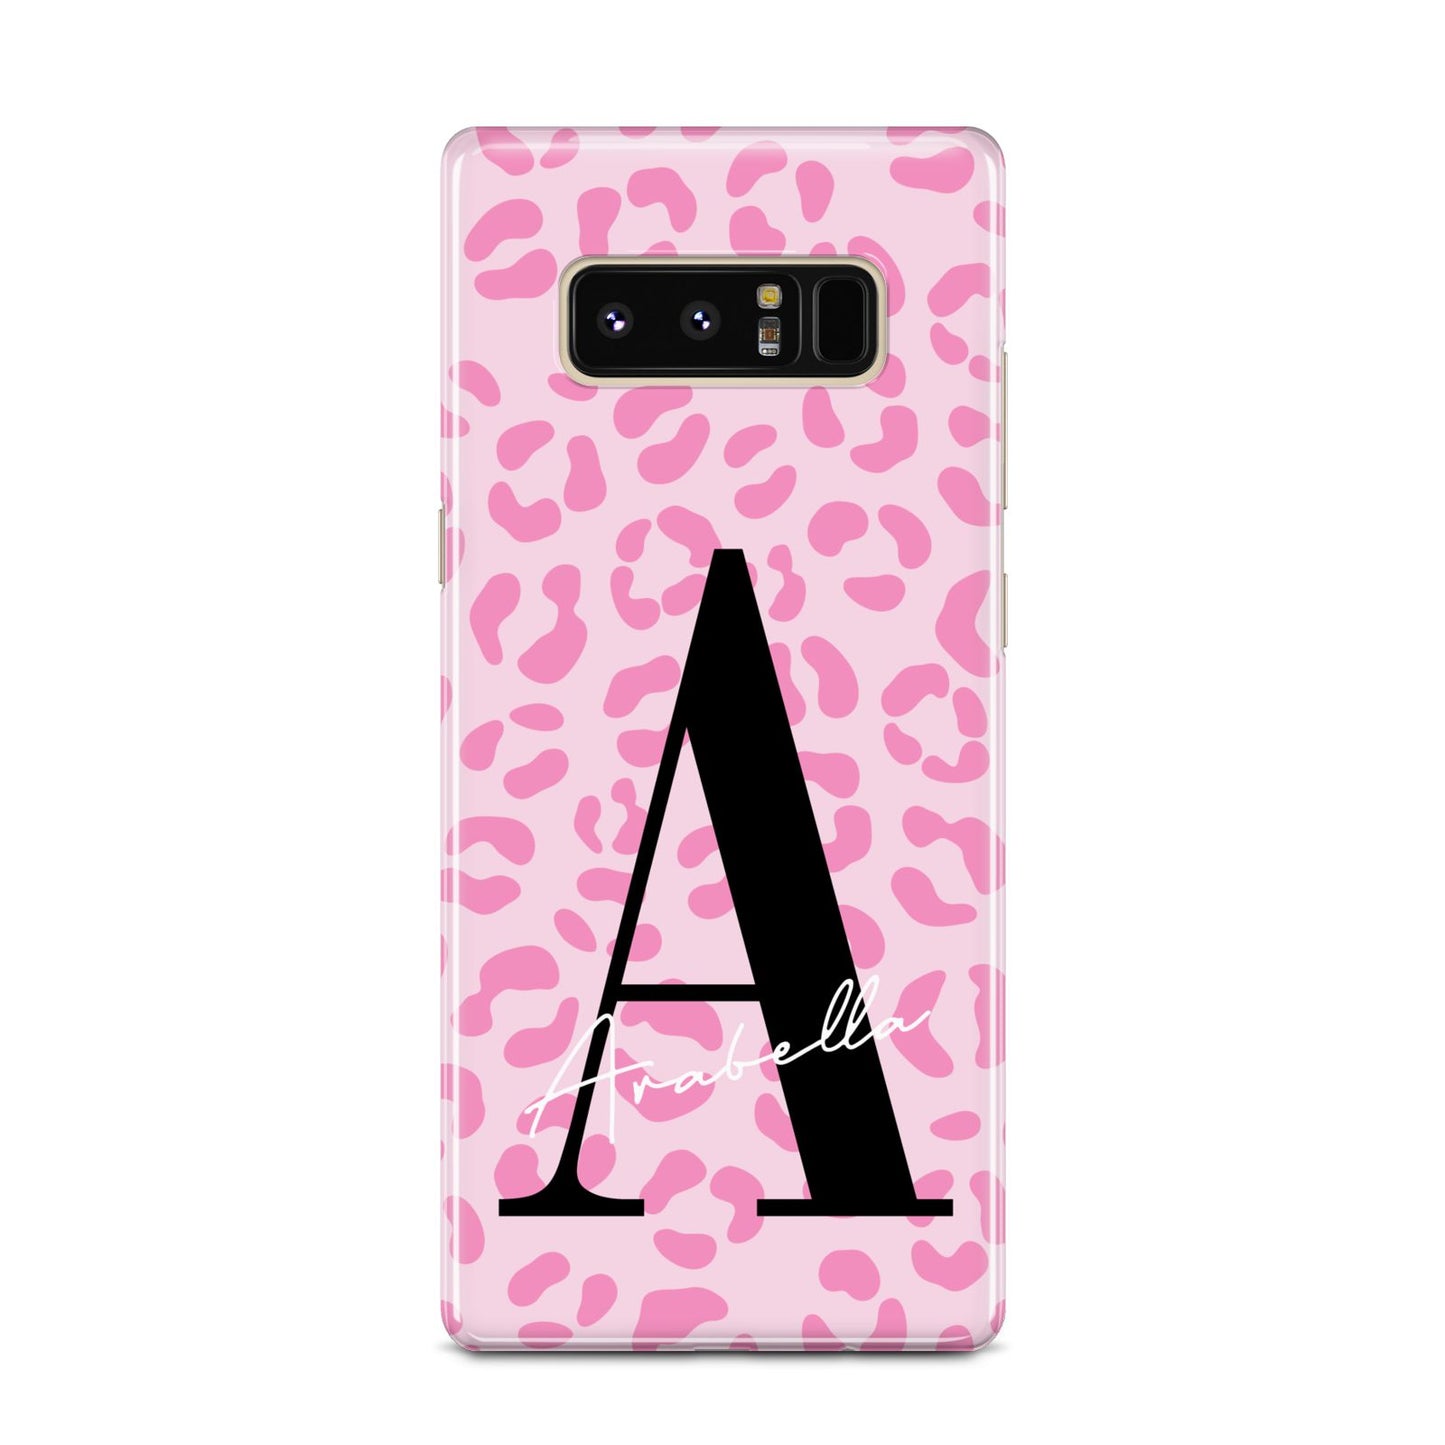 Personalised Pink Leopard Print Samsung Galaxy Note 8 Case